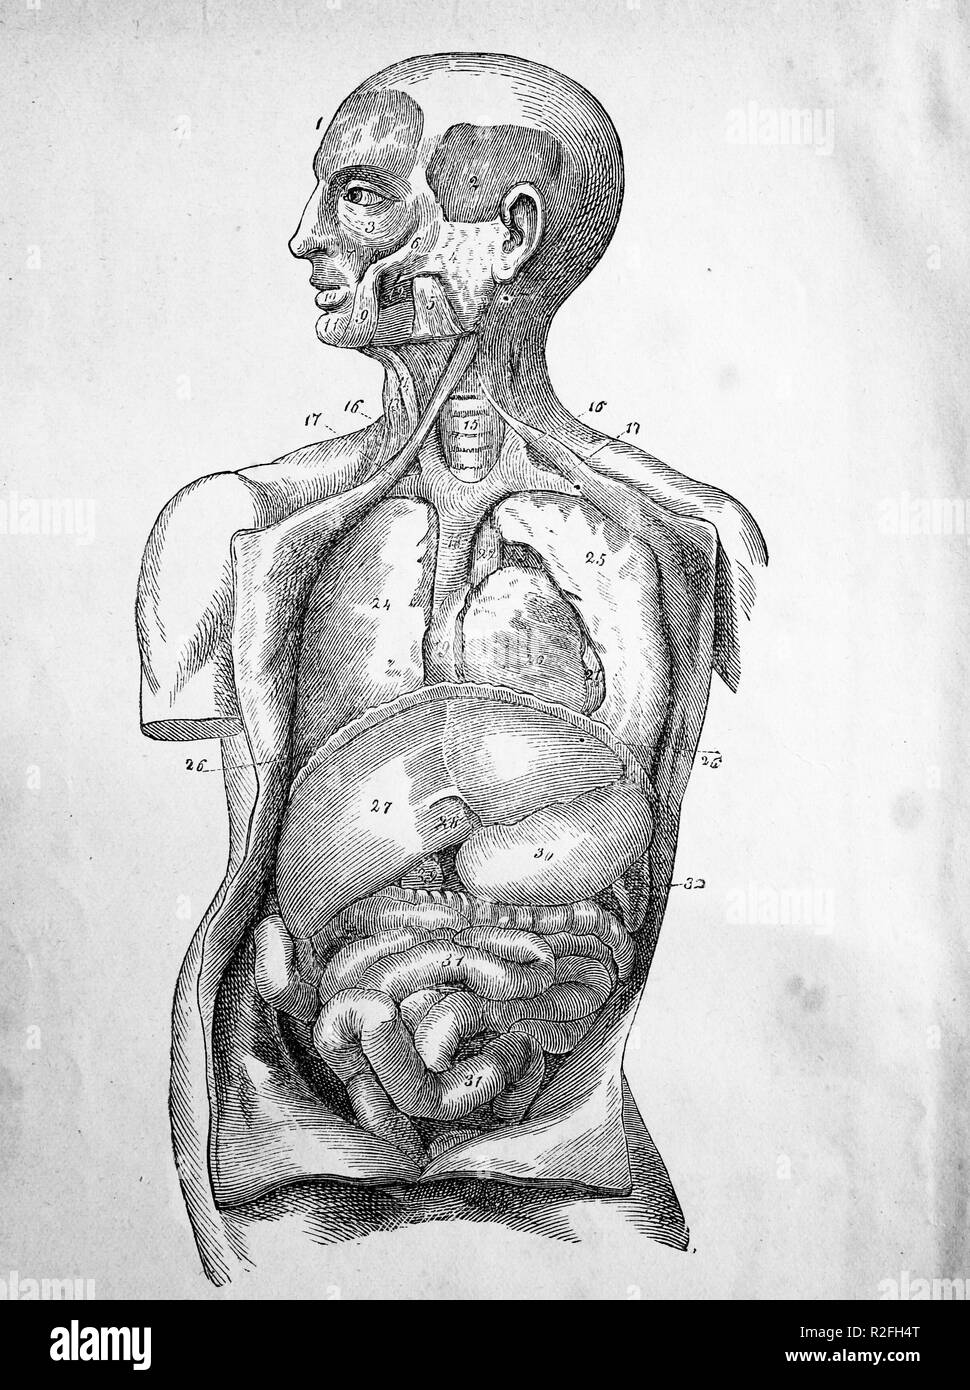 Digital improved reproduction, medical illustration of human organs from 1880, from an original print from the 19th century Stock Photo